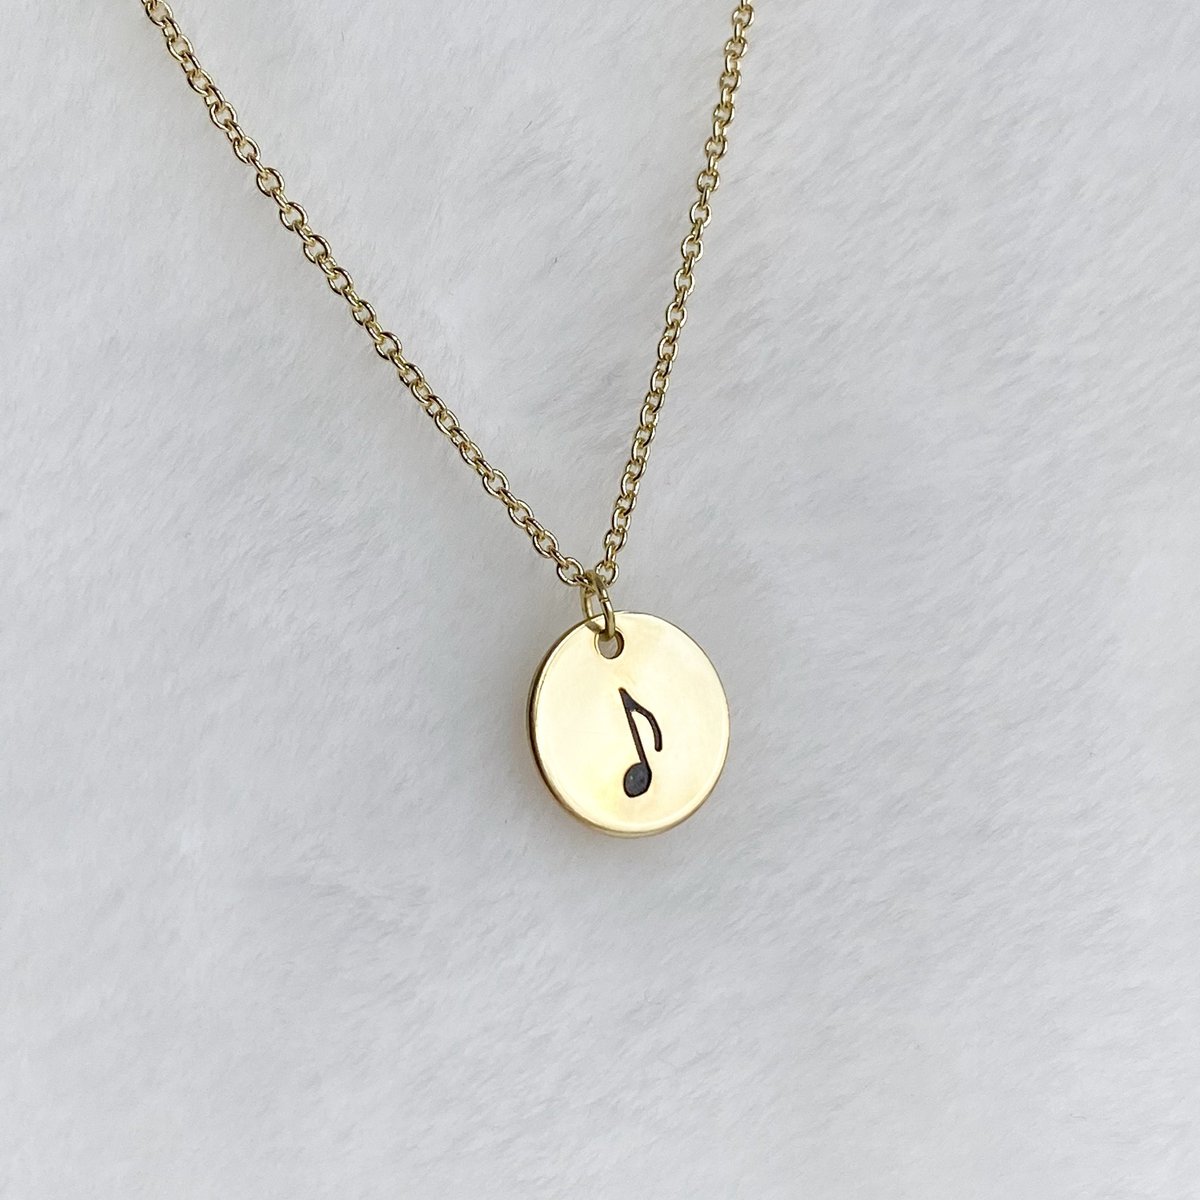 Gold Music Note Necklace, Music Note Jewelry, Gift for Musician, Gift for Music Teacher, Music Gift, Gold Layering Necklace, S468 tuppu.net/f529560d #GiftforHer #EtsyJewelry #Handmade #SmallBusiness #EtsyShop #Earrings #Jewelry #MusicNoteJewelry